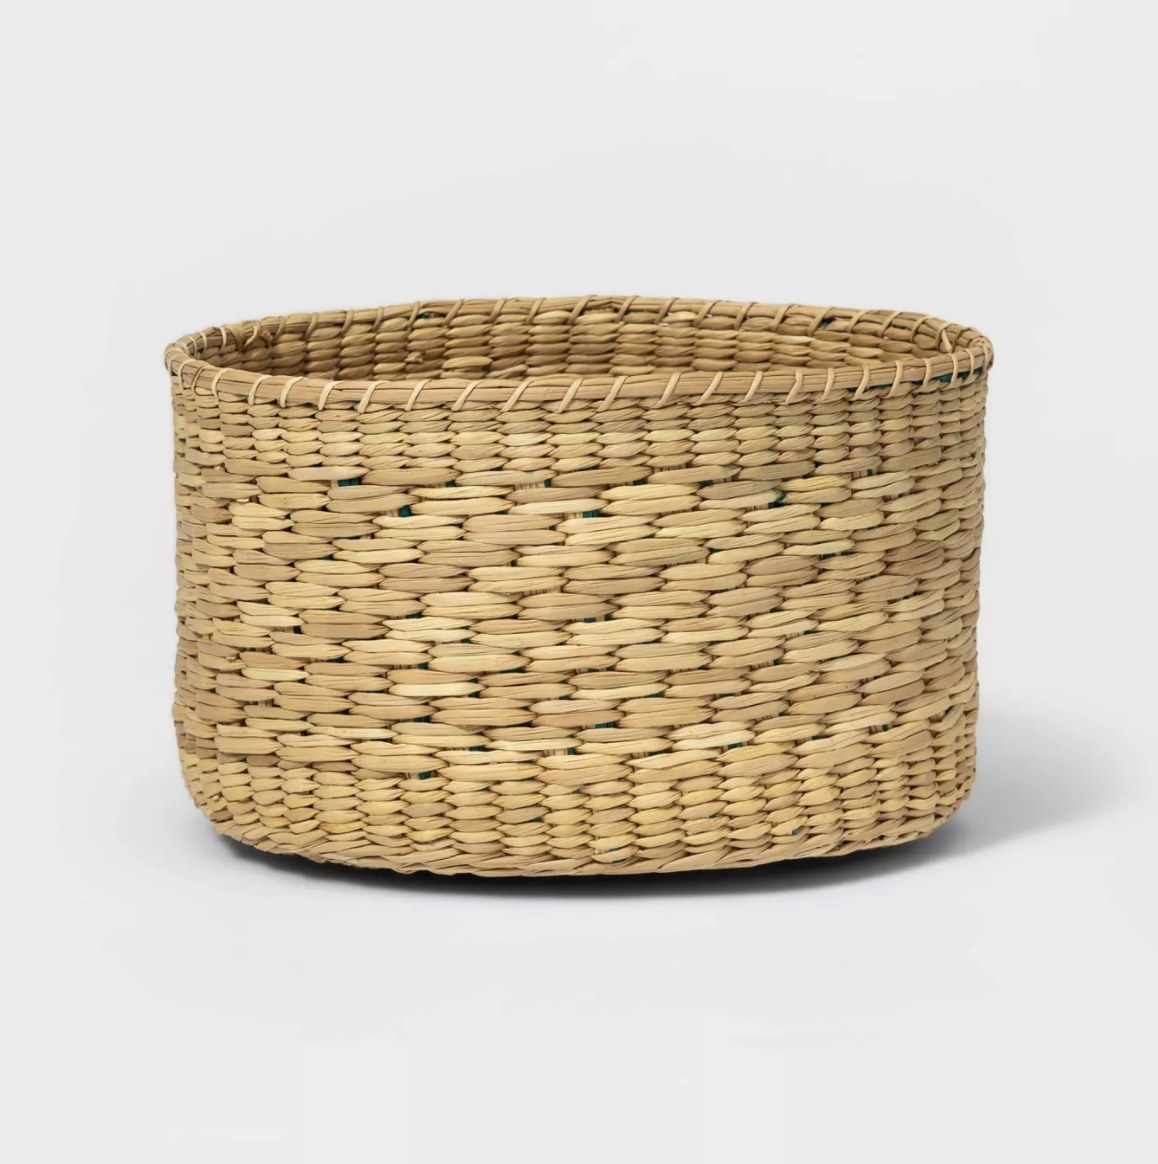 The round woven basket is a light tan color